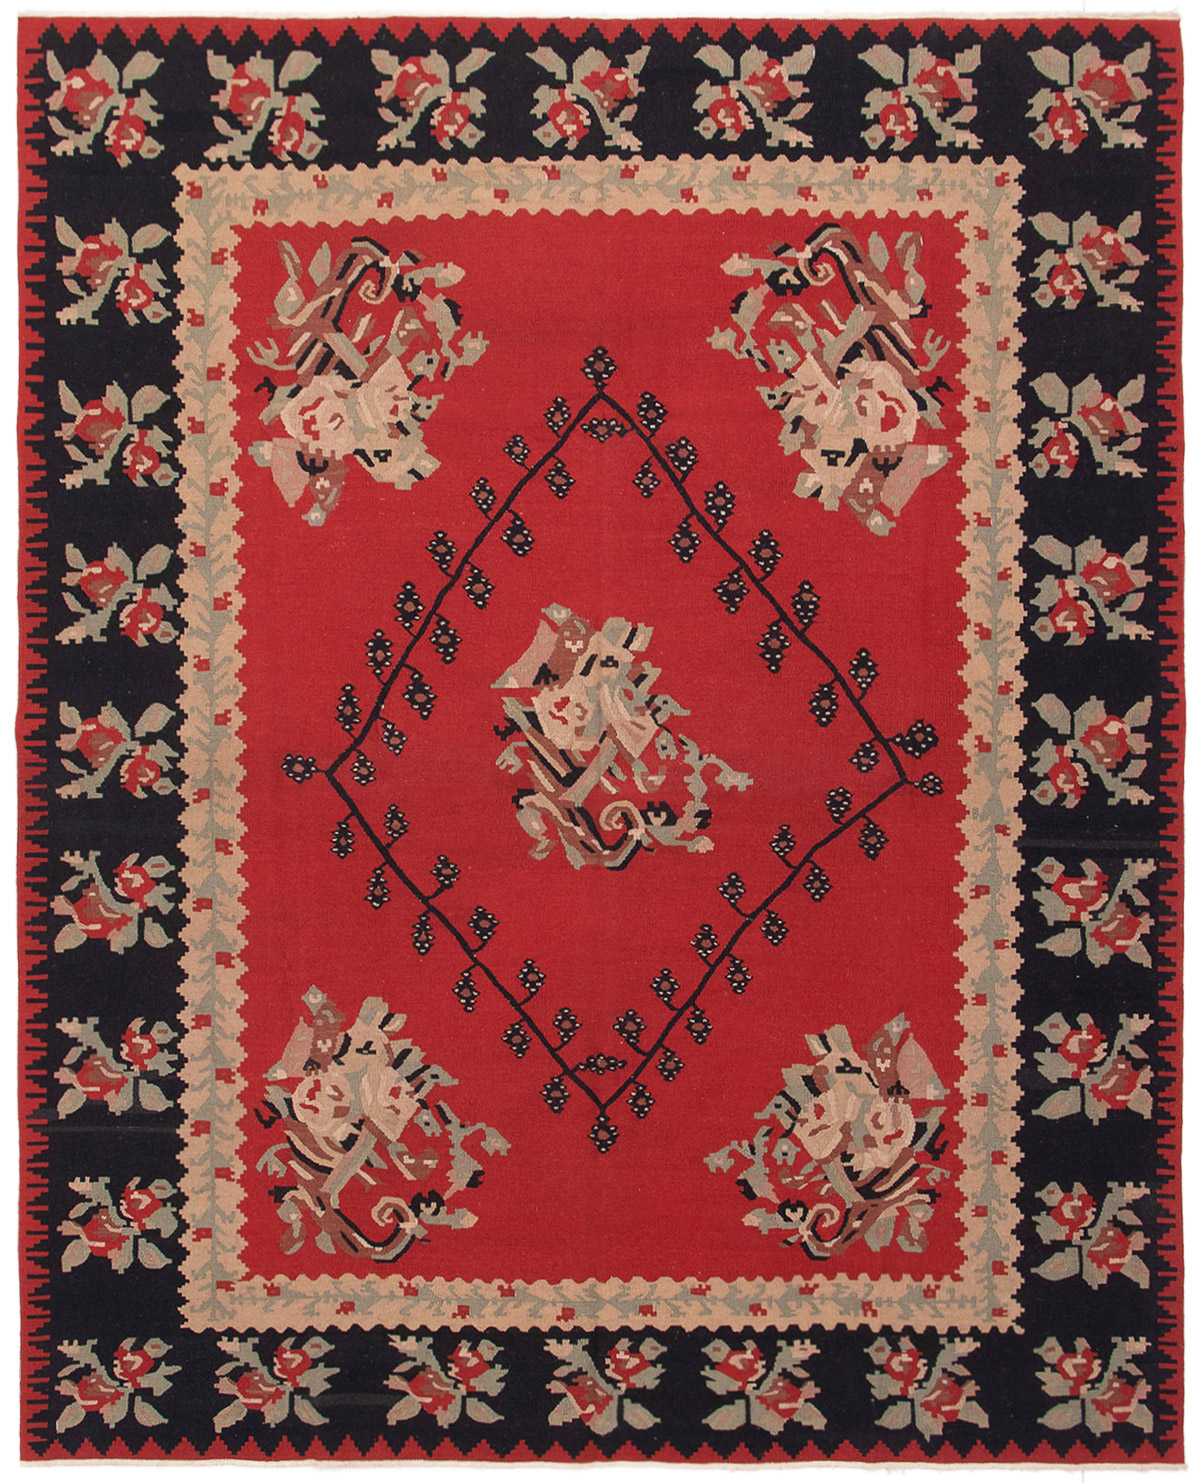 Hand woven Royale Red Wool Kilim 7'10" x 9'5" Size: 7'10" x 9'5"  